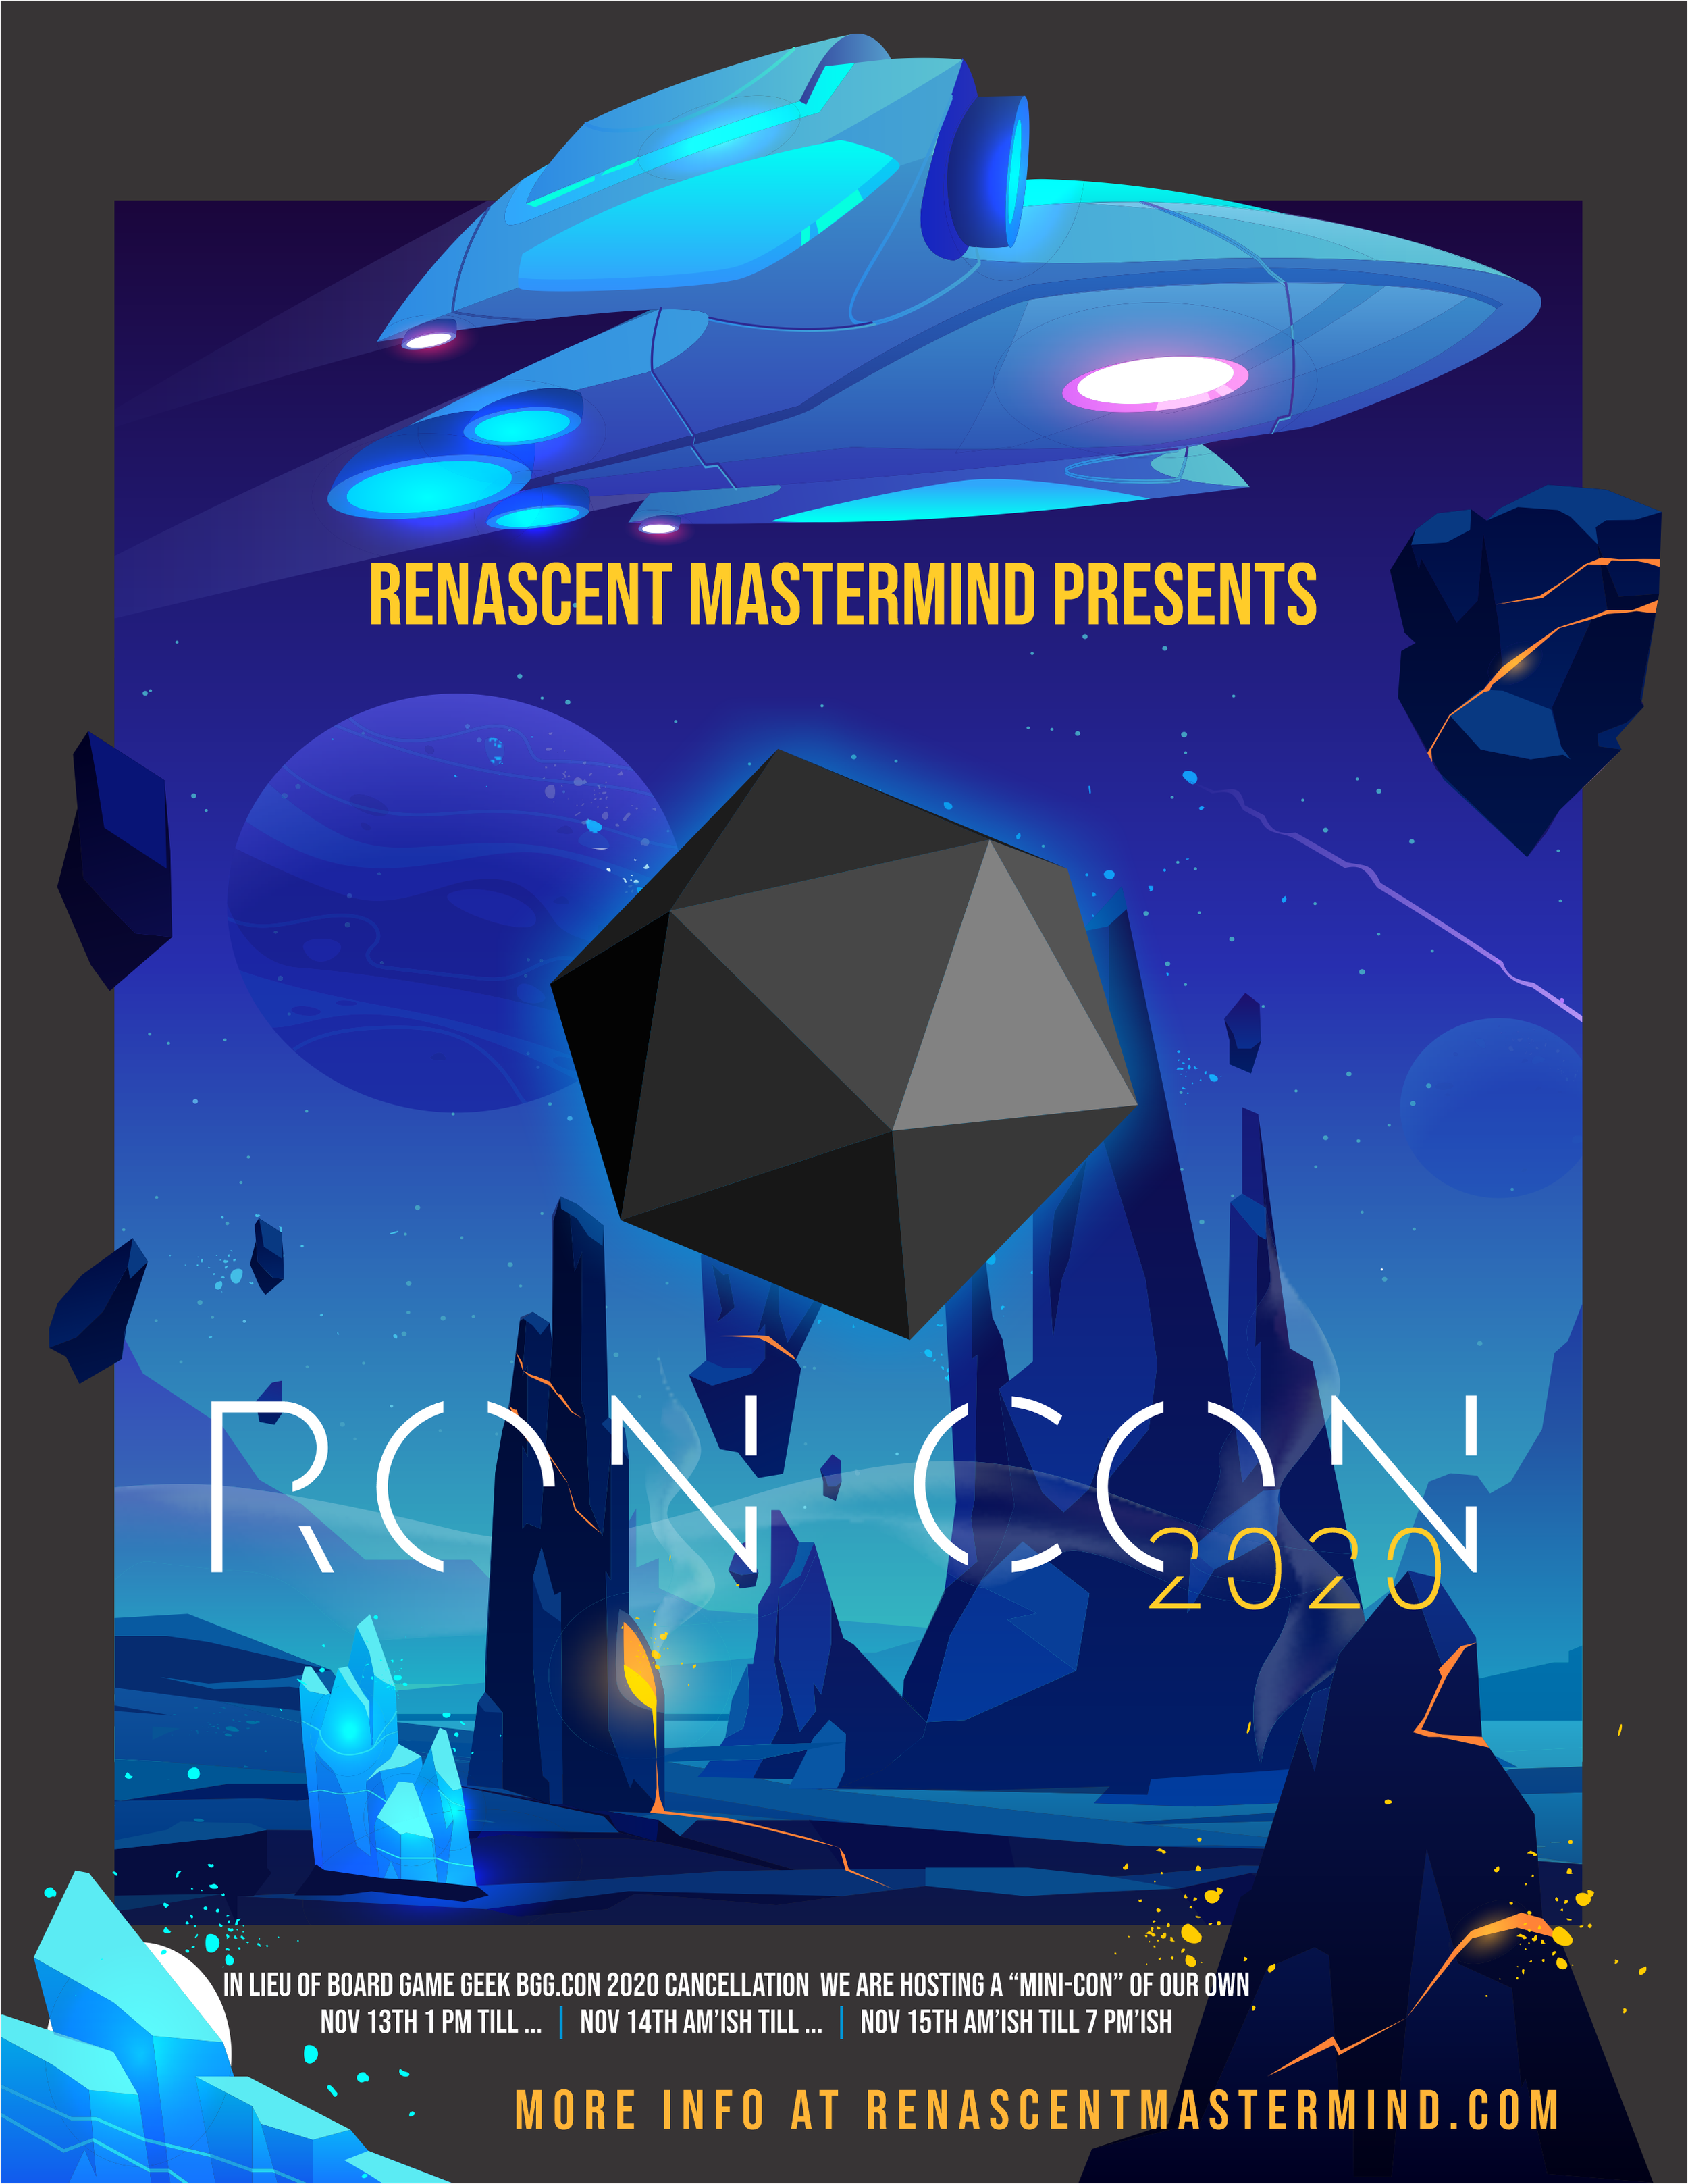  In lieu of BGG CON cancellation for 2020, Renascent Mastermind is hosting its own "Mini-Con".   Hosts Ron Harris, Ralph Justiz and Lucas Zupan will officiate the festivities and conquering of imaginary nations.    Bring your A-game and be prepared t